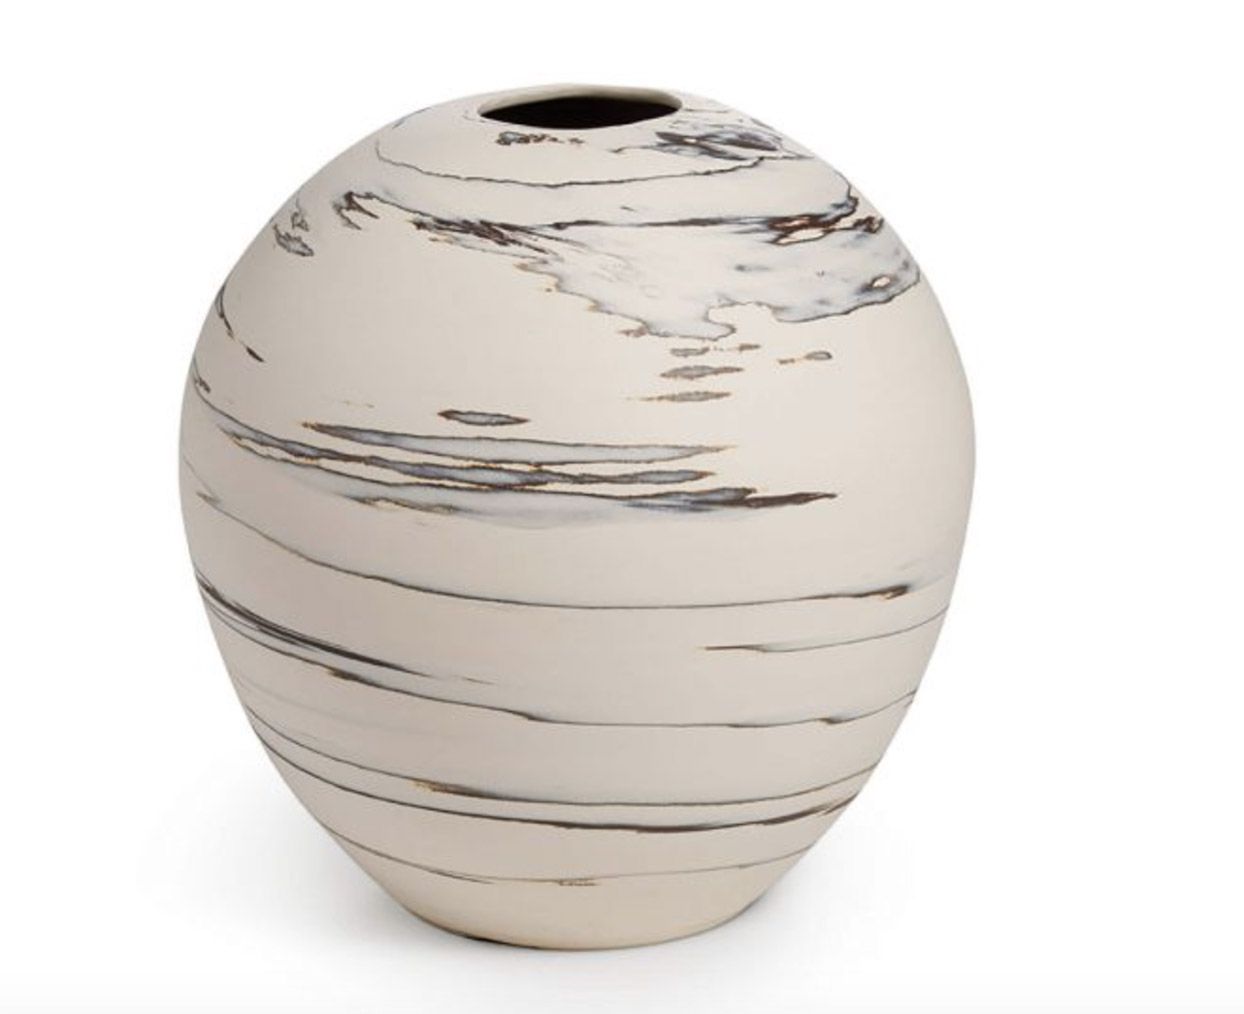 rounded vase with small opening, cream and gray